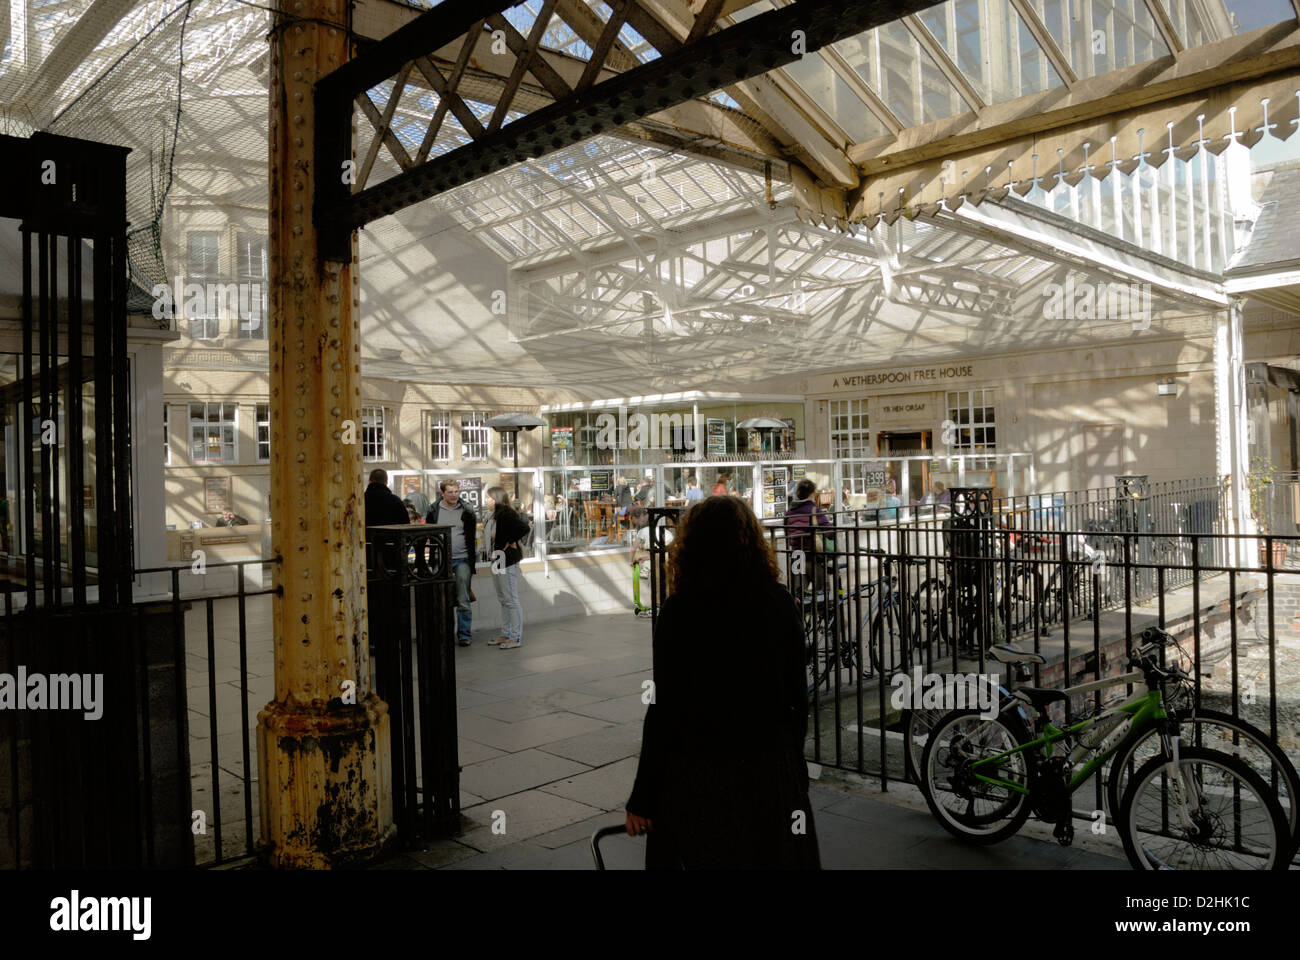 Aberystwyth Railway Station, partially converted to a Wetherspoons Public House, Wales. Stock Photo